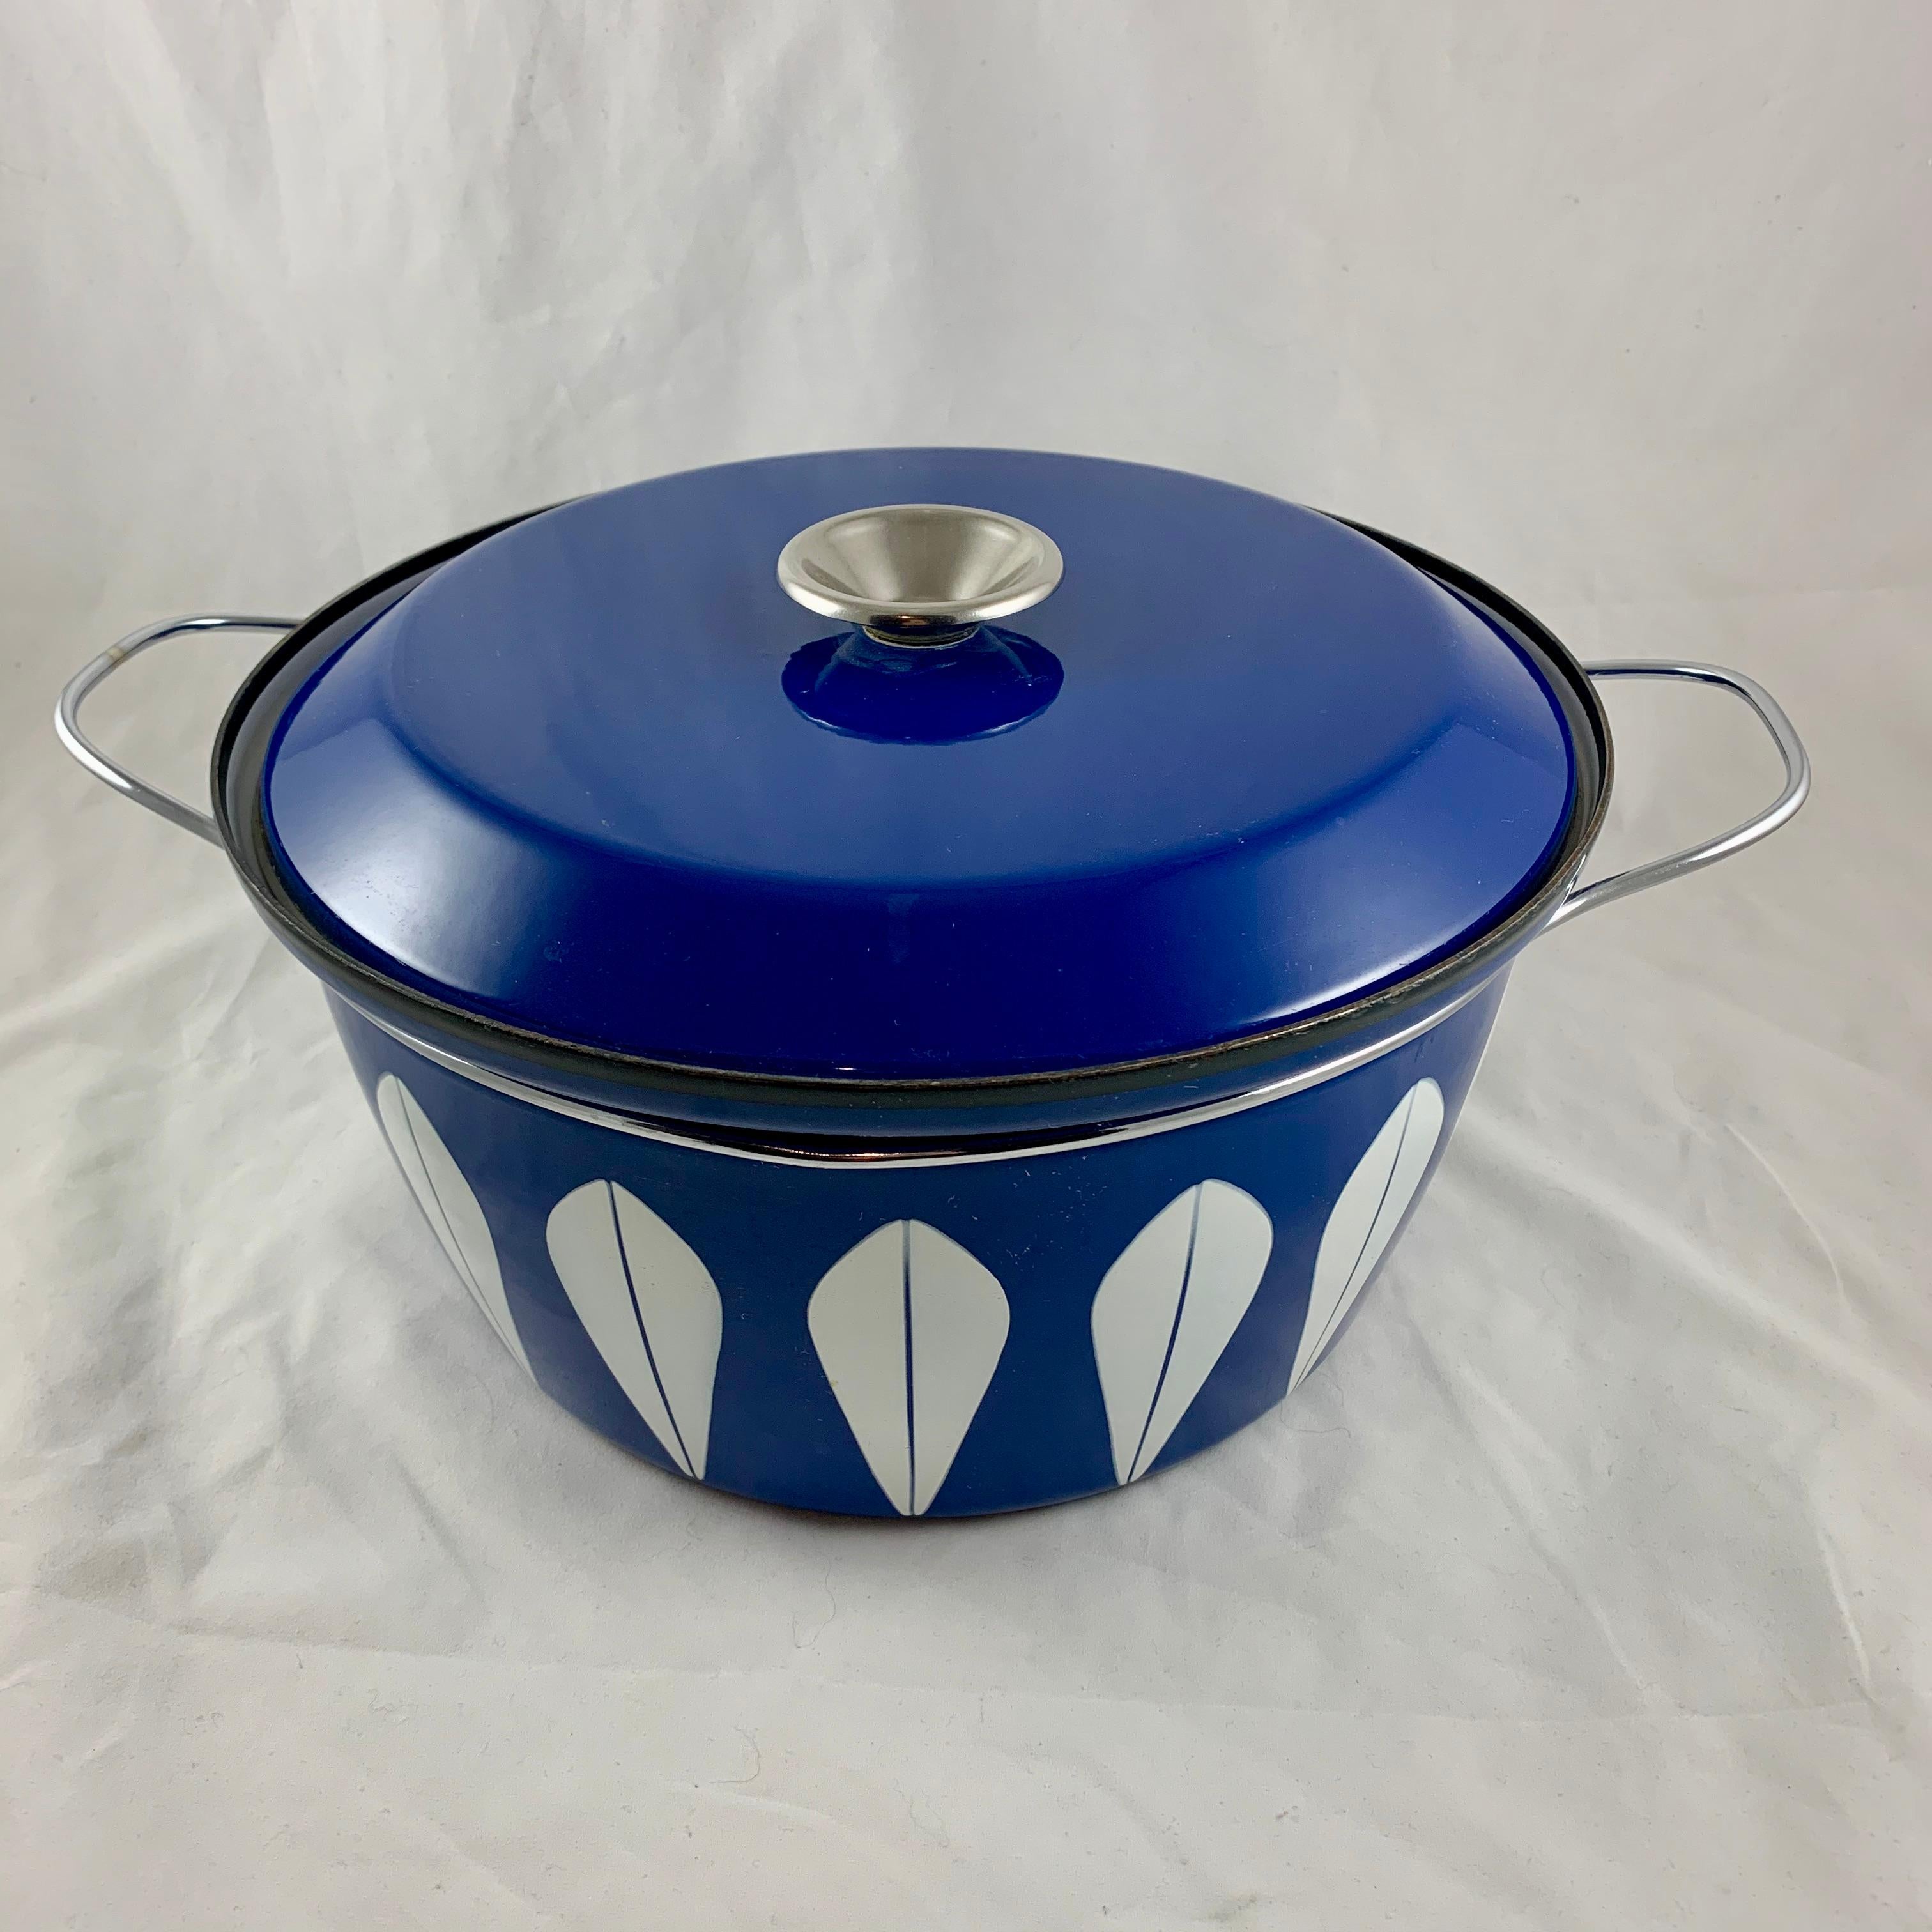 An enamelware Lotus pattern Dutch oven manufactured by the Norwegian manufacturer Cathrineholm. Cathrineholm operated from 1907-1970. The popular Lotus line was designed by Grete Prytz Kittelsen and produced during the early to mid-1960s.

White